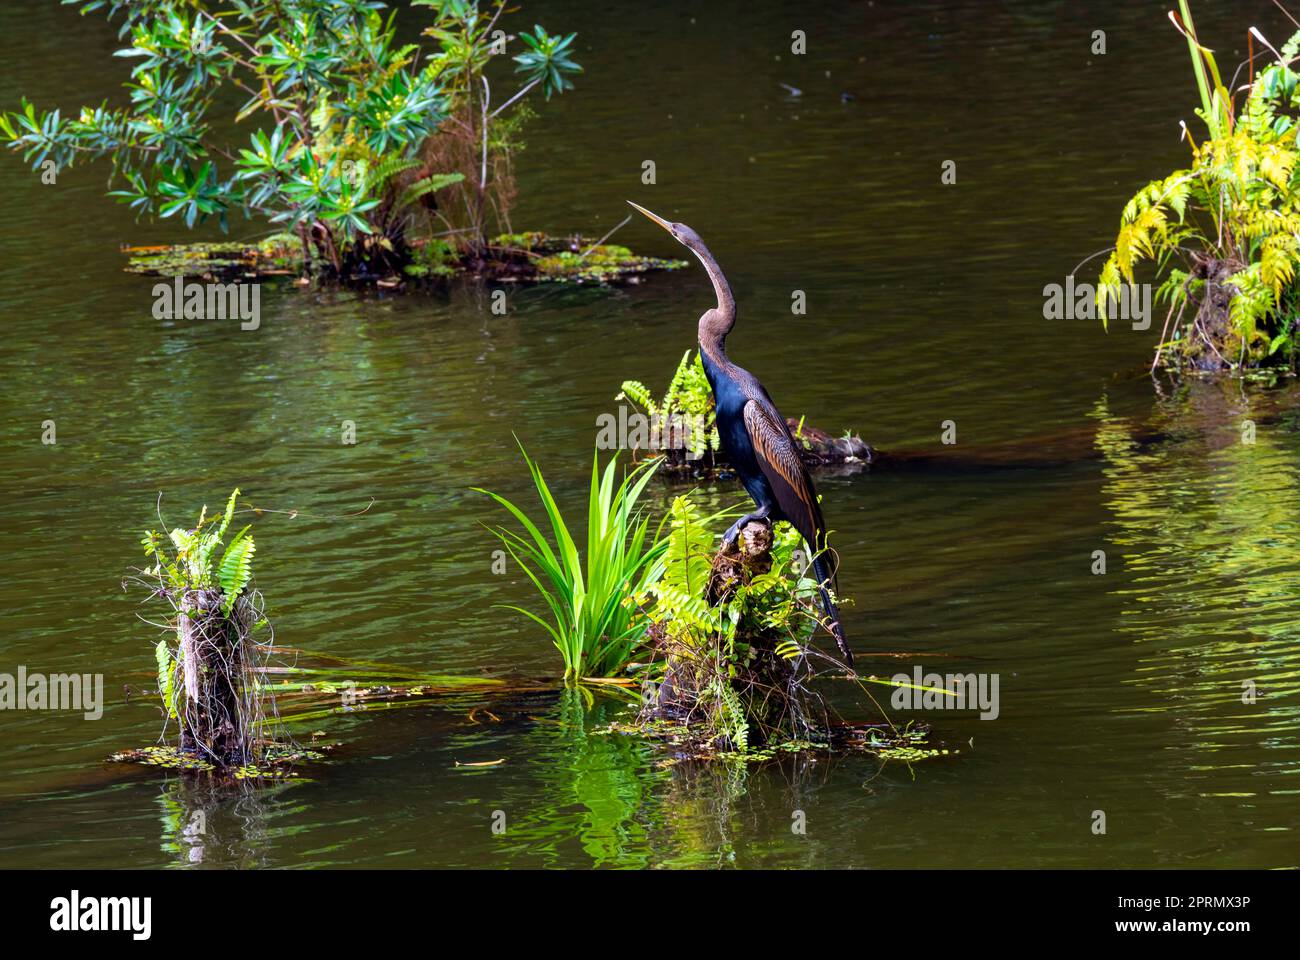 Oriental darter or Indian darter (Anhinga melanogaster) is a wide-ranging species of wading bird in the heron family, Ardeidae. Rainforest on Borneo, Stock Photo